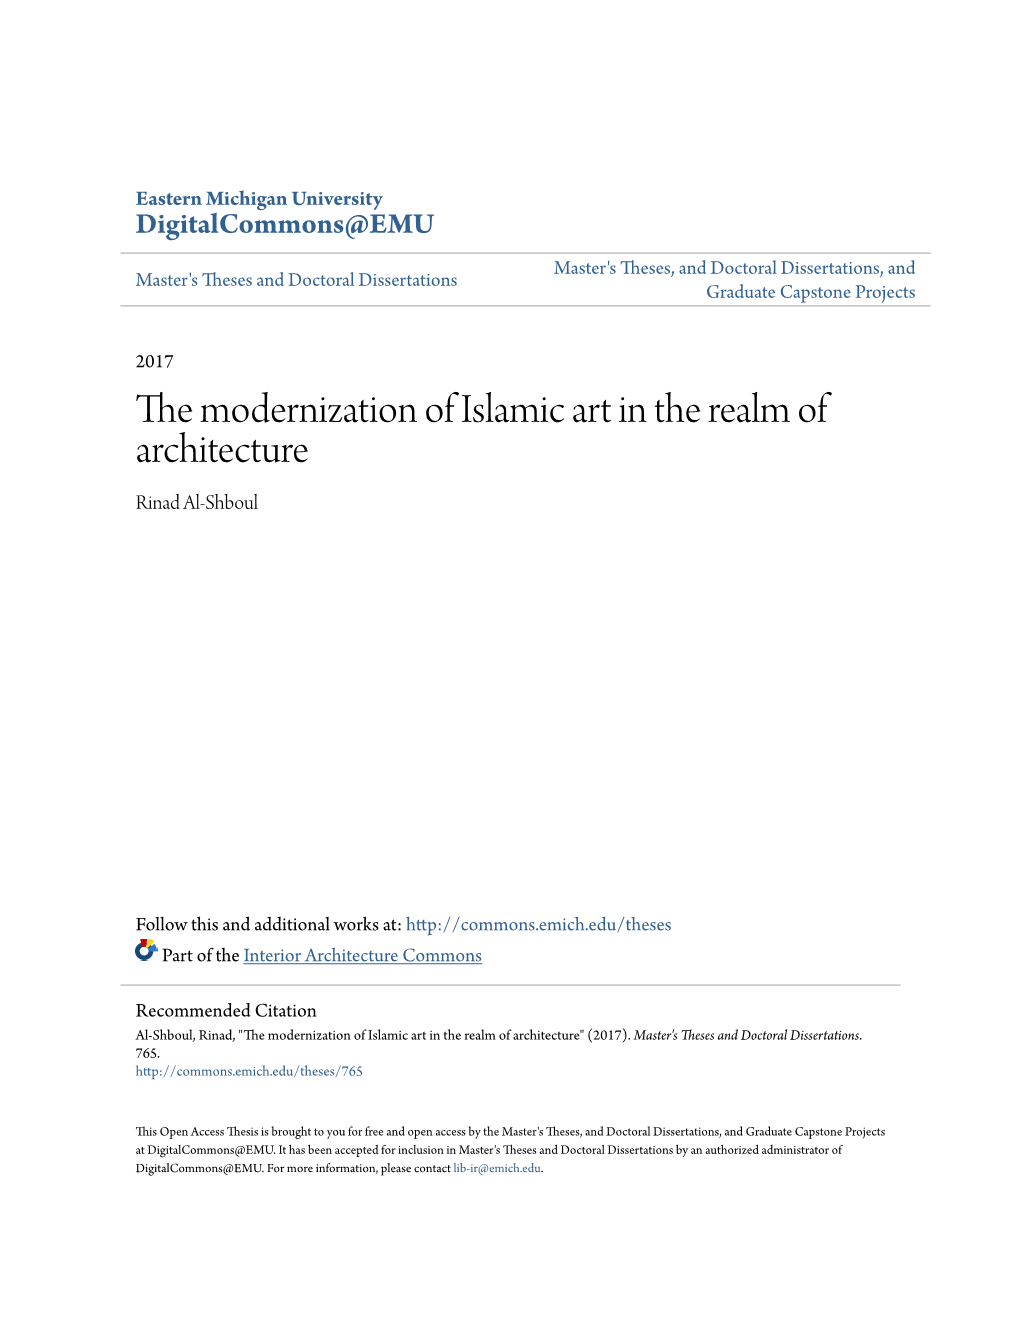 The Modernization of Islamic Art in the Realm of Architecture Rinad Al-Shboul